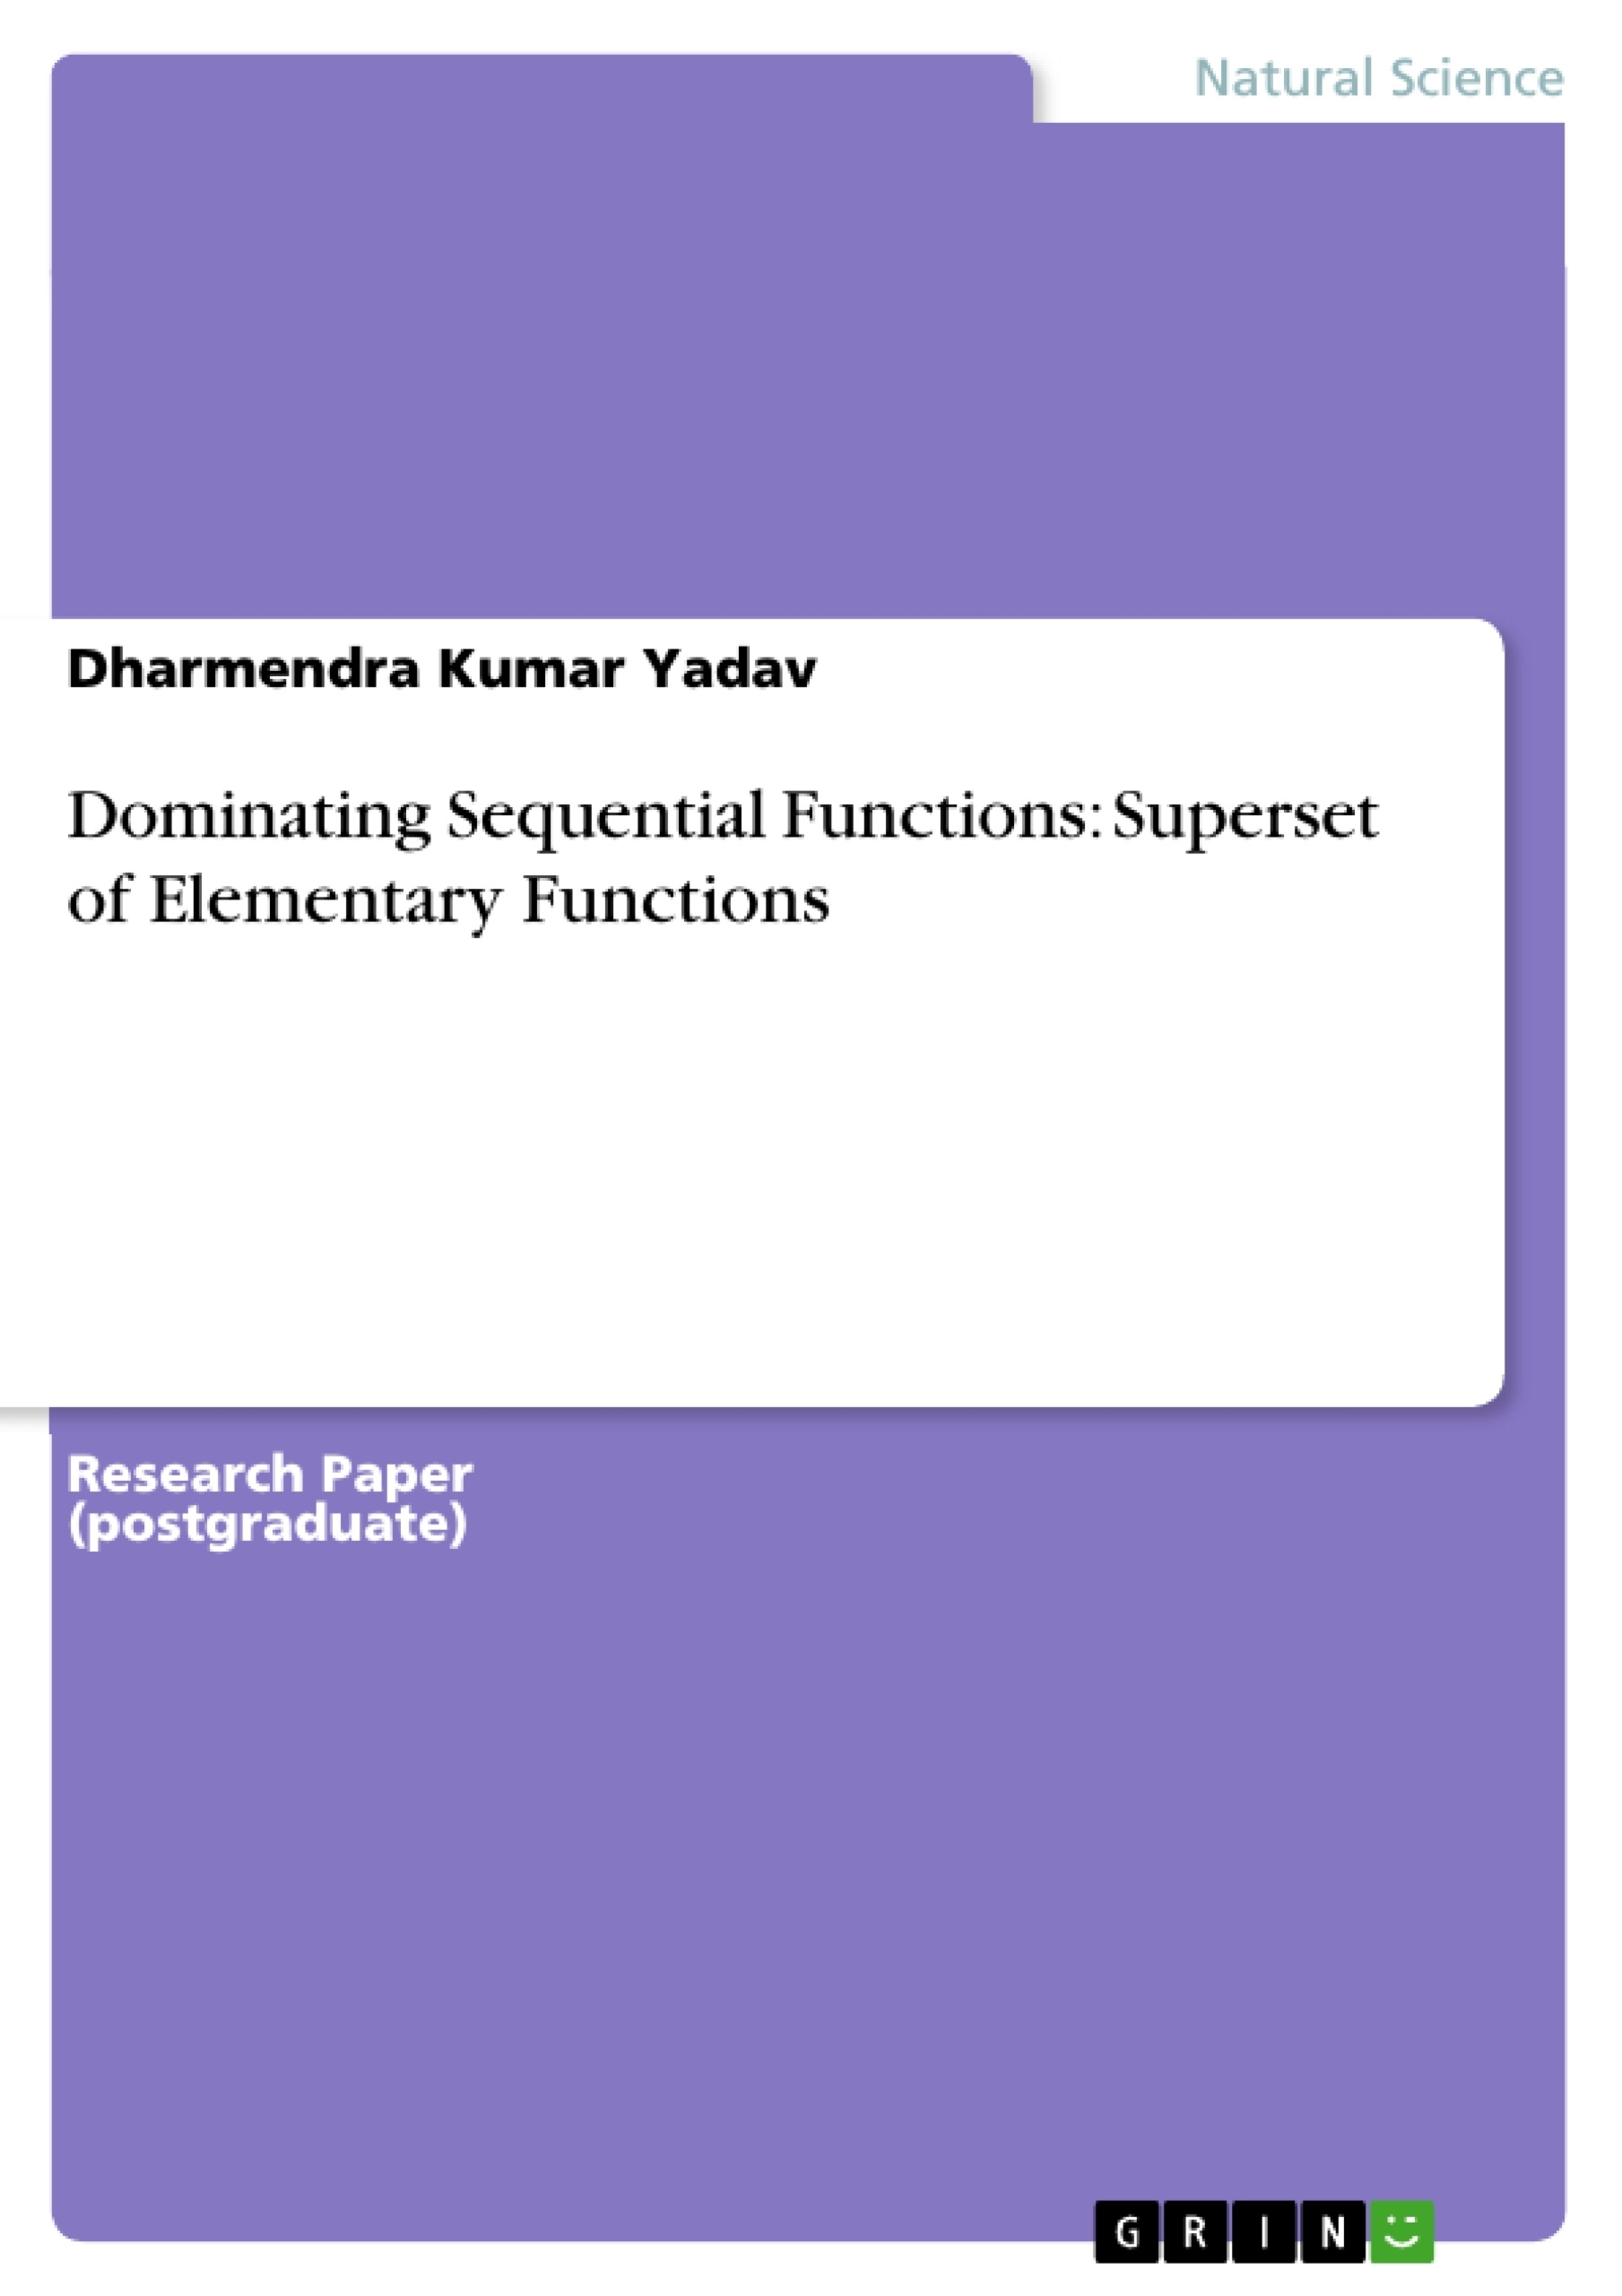 Title: Dominating Sequential Functions: Superset of Elementary Functions